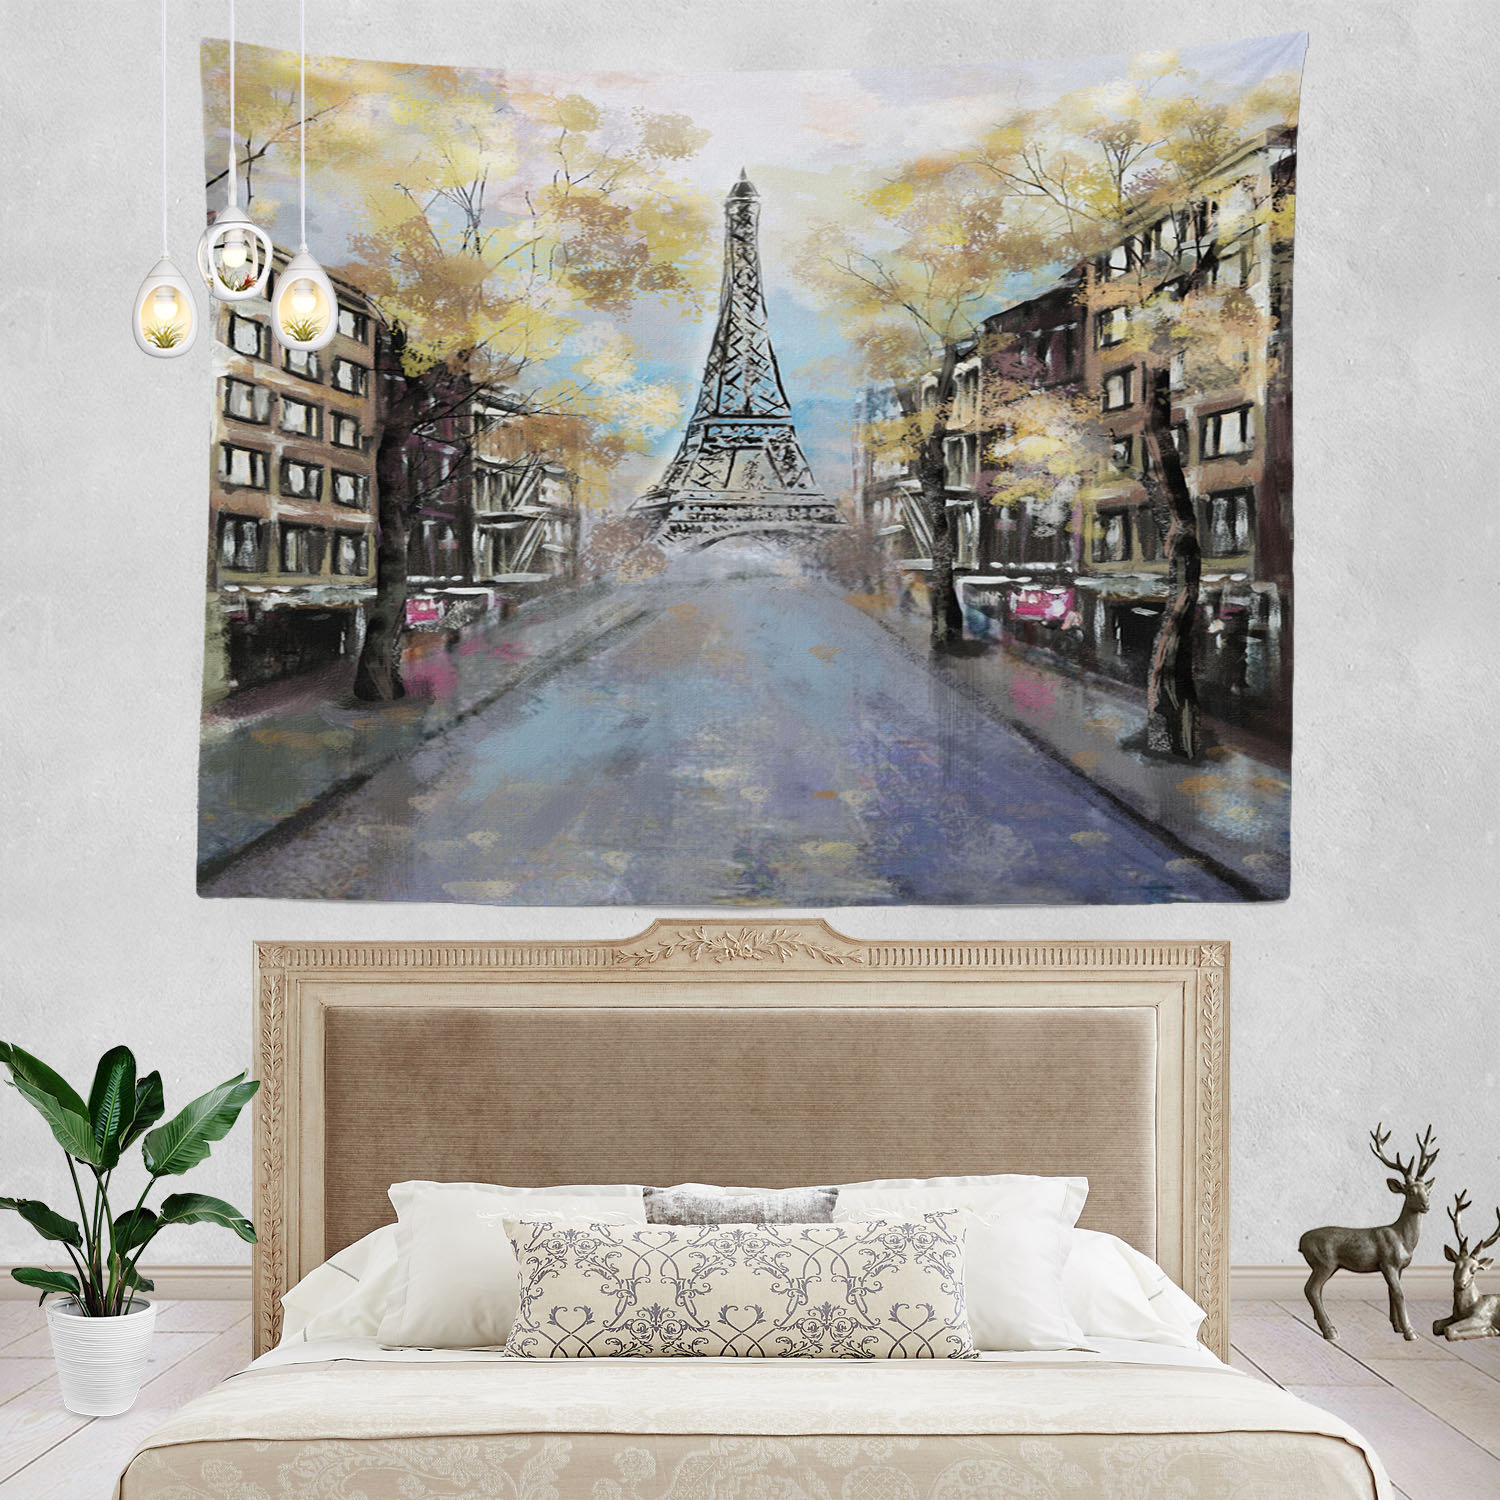 Tapestry Wall Hanging Blanket Polyester Dorm Decor Eiffel Tower Paris LOVE Roses 